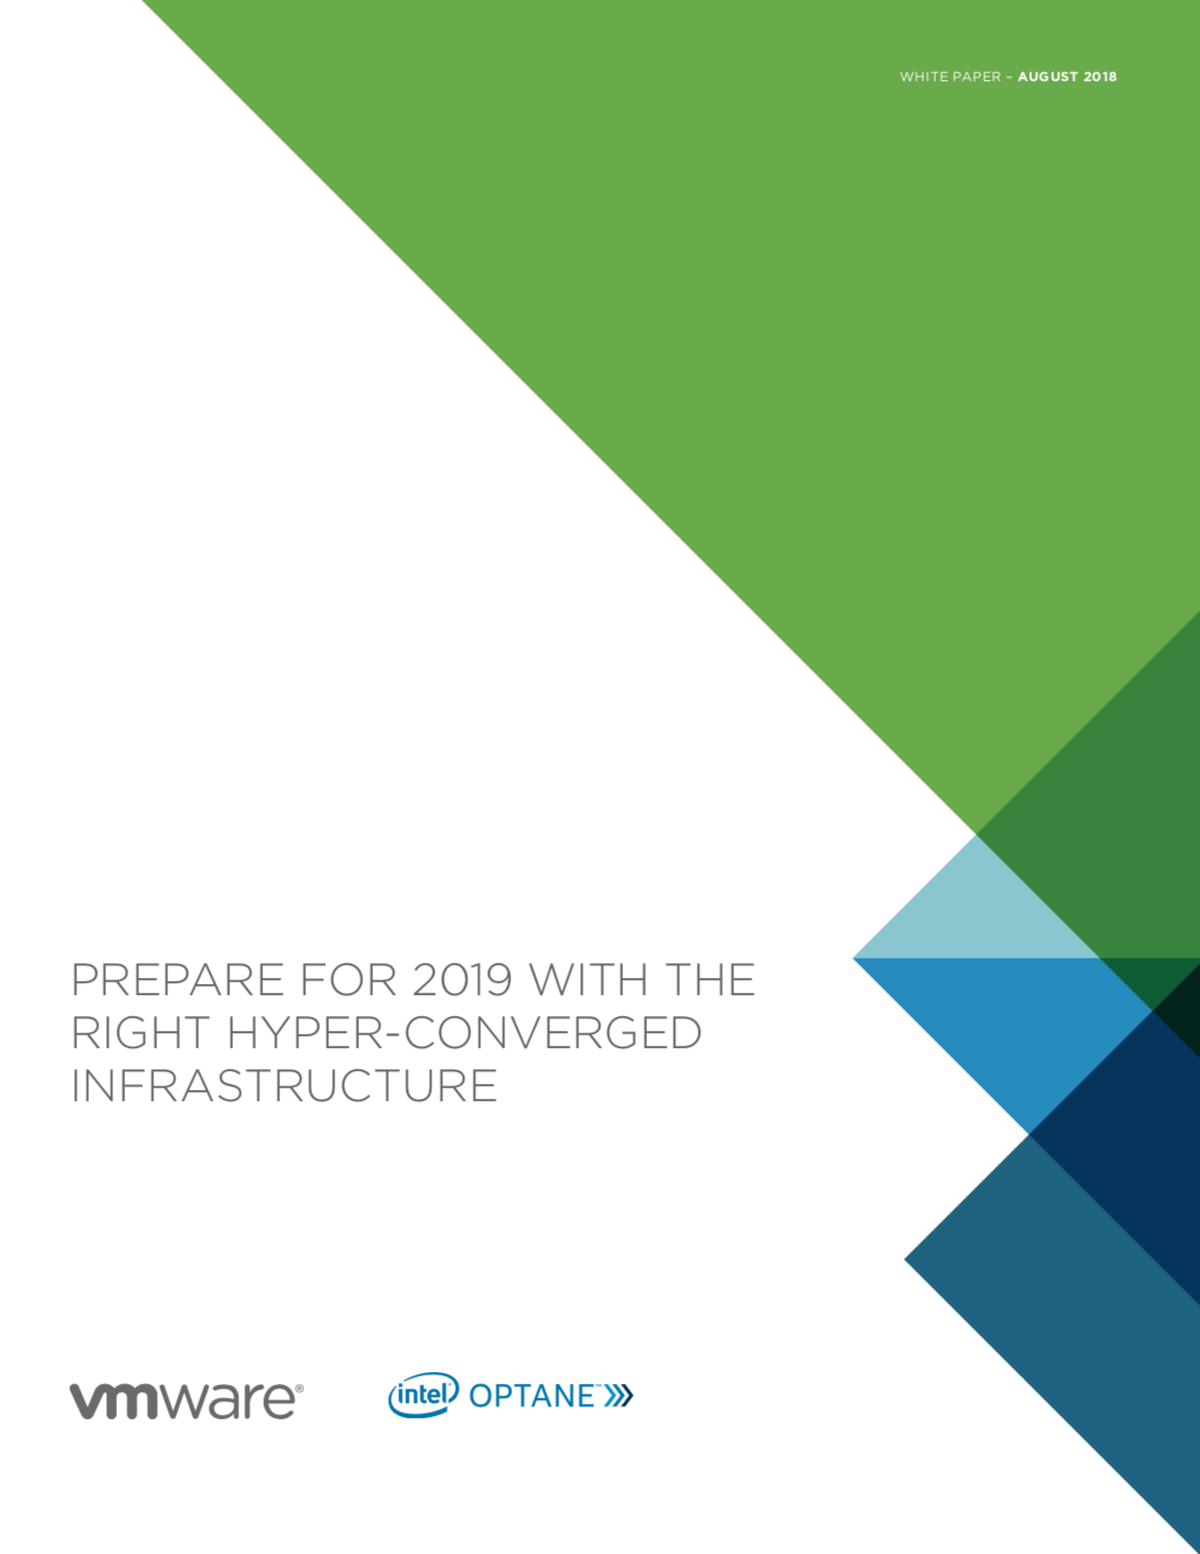 Prepare For 2019 With The Right Hyper-Converged Infrastructure